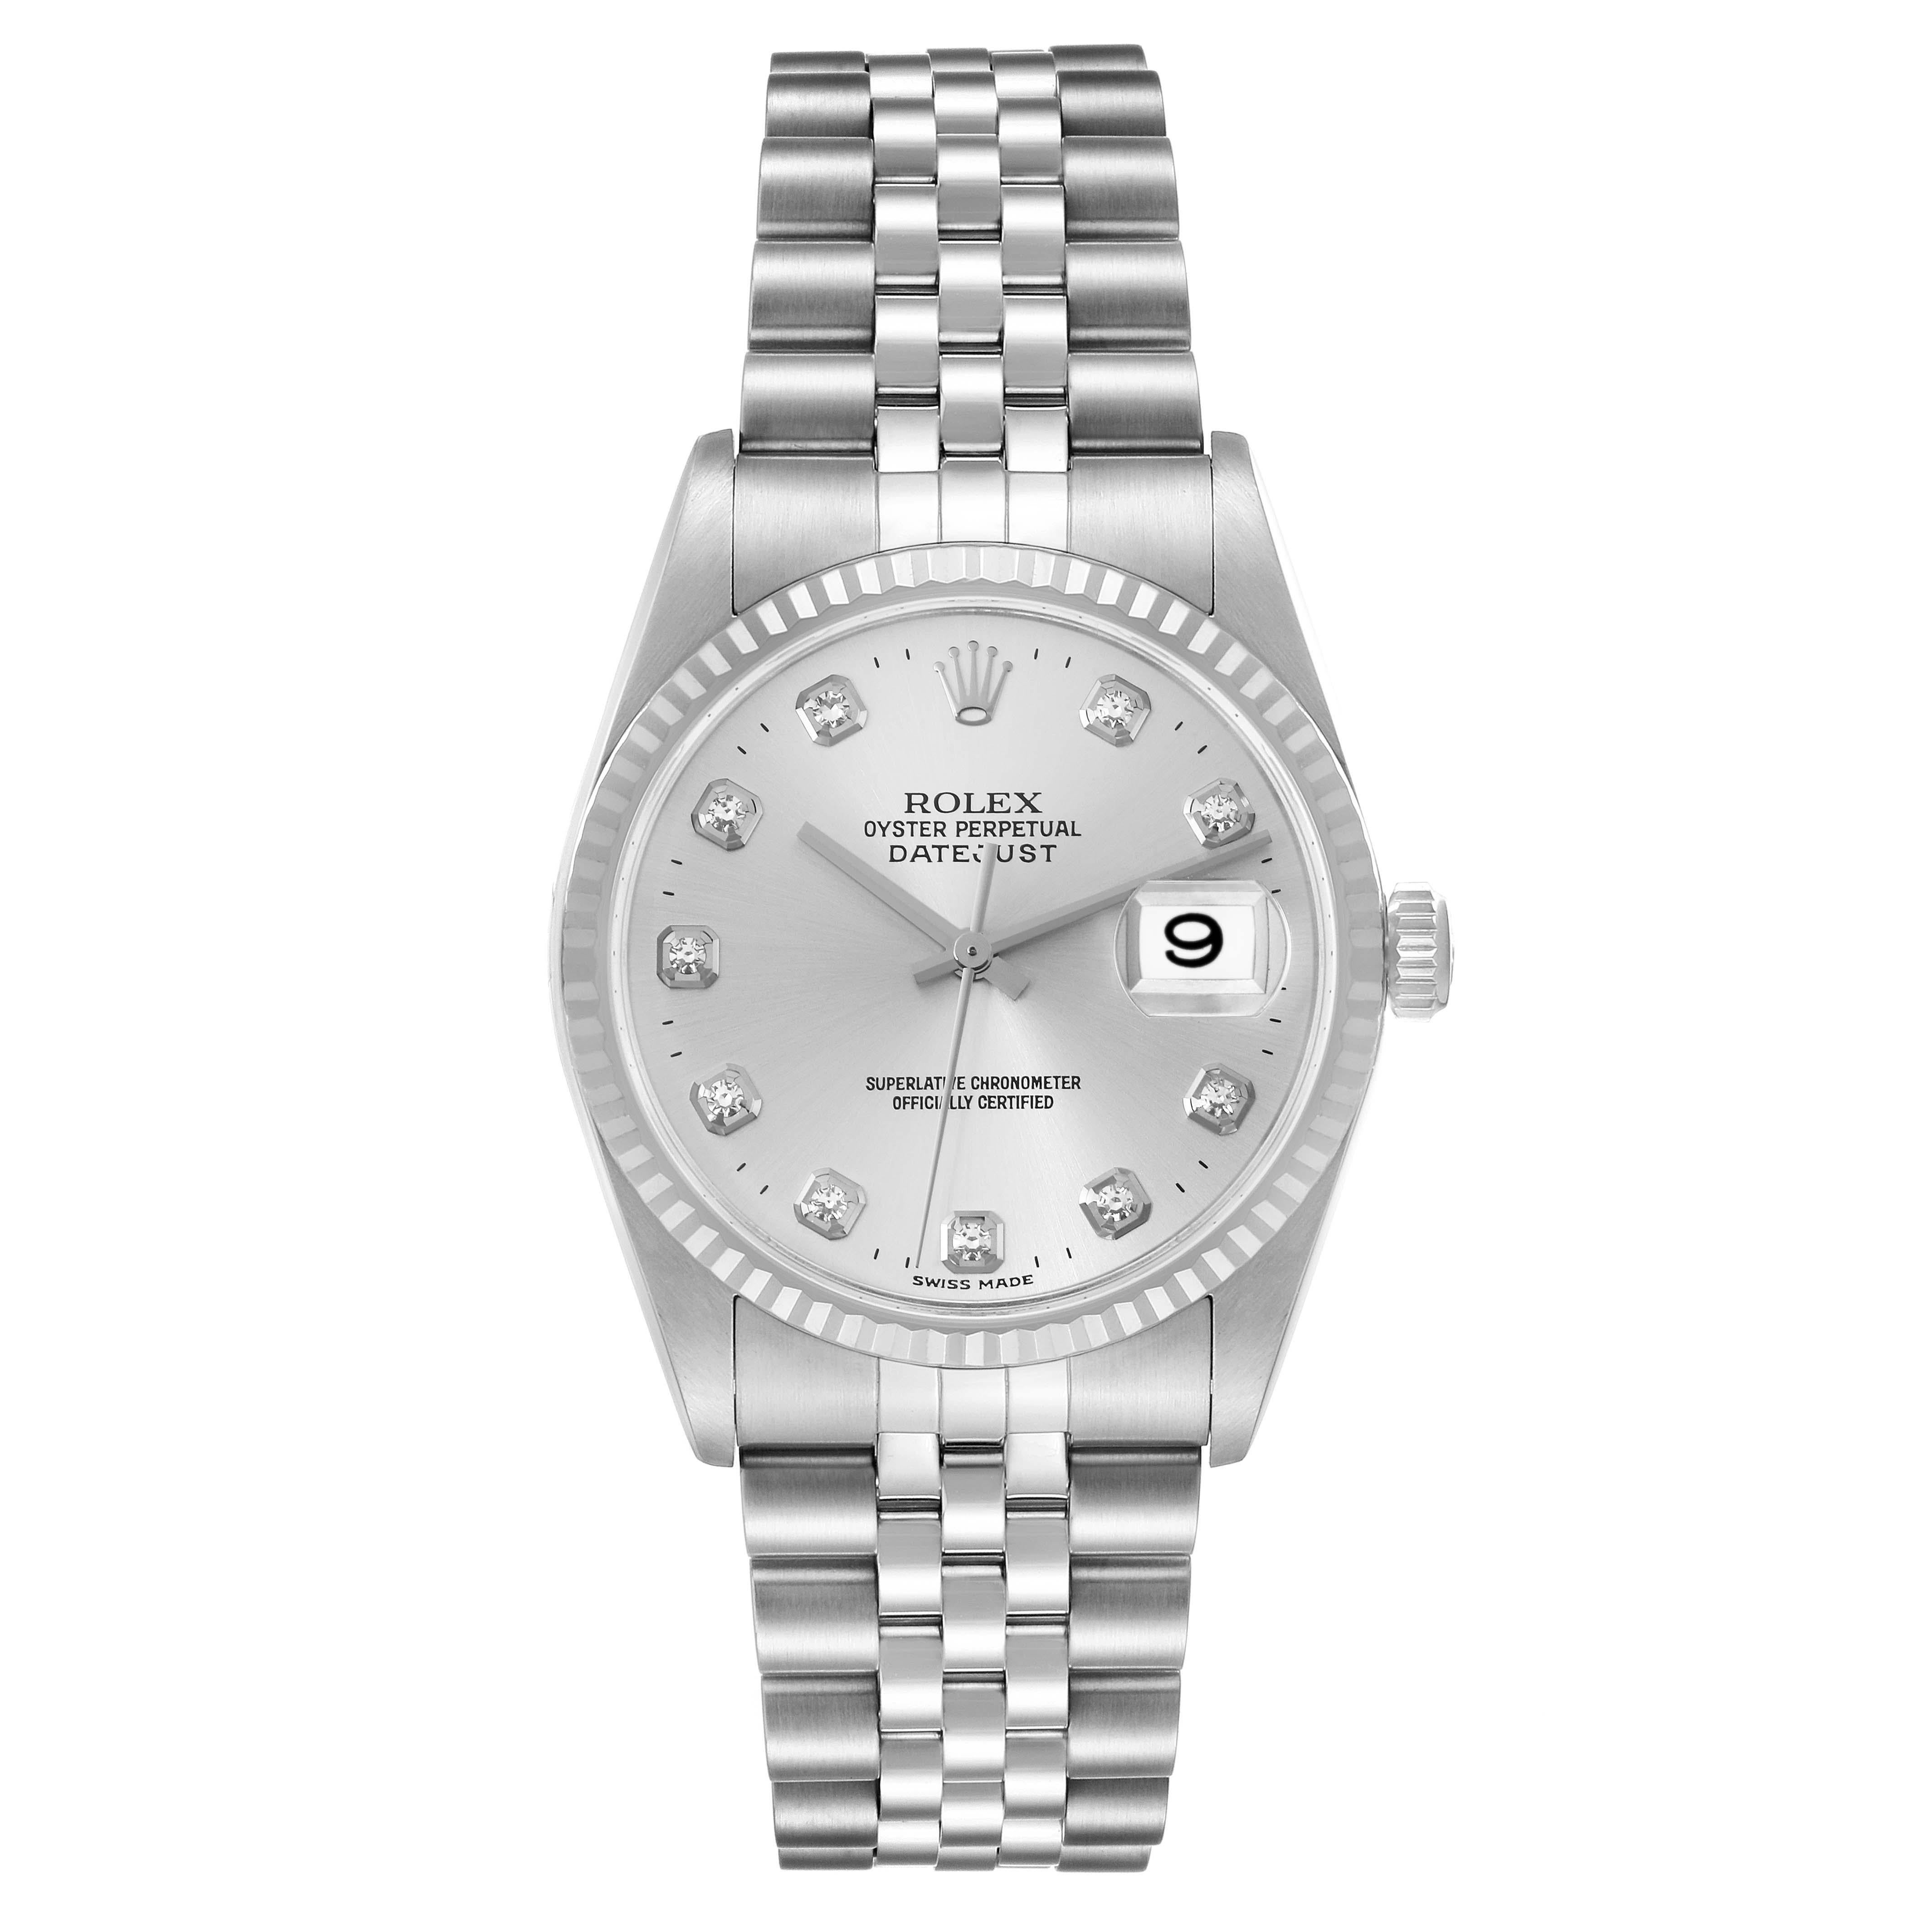 Rolex Datejust Steel White Gold Diamond Dial Mens Watch 16234. Officially certified chronometer automatic self-winding movement. Stainless steel oyster case 36.0 mm in diameter. Rolex logo on a crown. 18k white gold fluted bezel. Scratch resistant